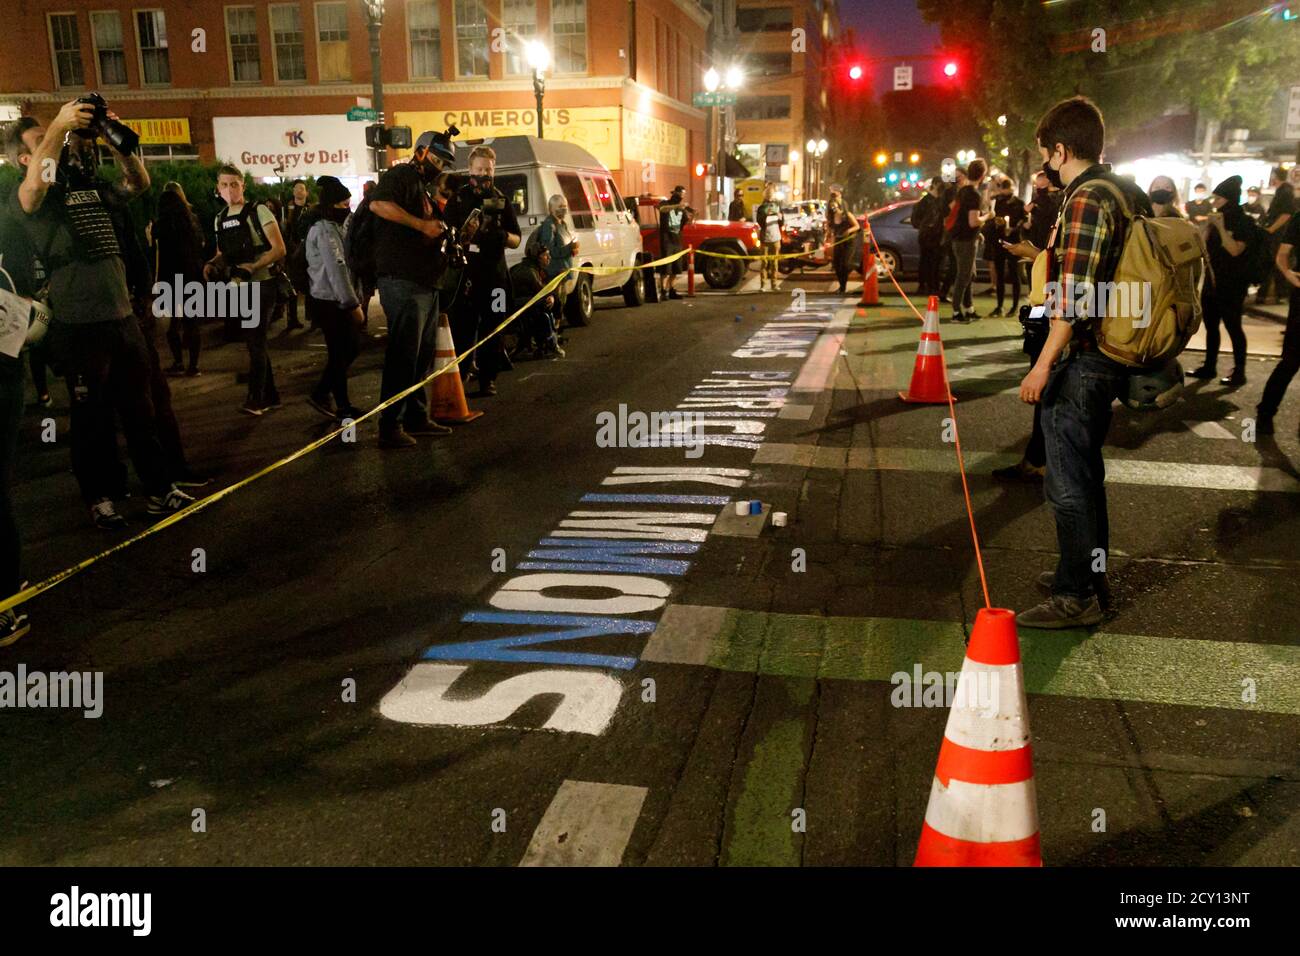 Portland, USA. 30th Sep, 2020. Patrick Kimmons, a 27-year old black man shot by police two years ago today, was commemorated with speeches and street-painting at the site of his death in Portland, Oregon on Sept. 30, 2020. (Photo by John Rudoff/Sipa USA) Credit: Sipa USA/Alamy Live News Stock Photo